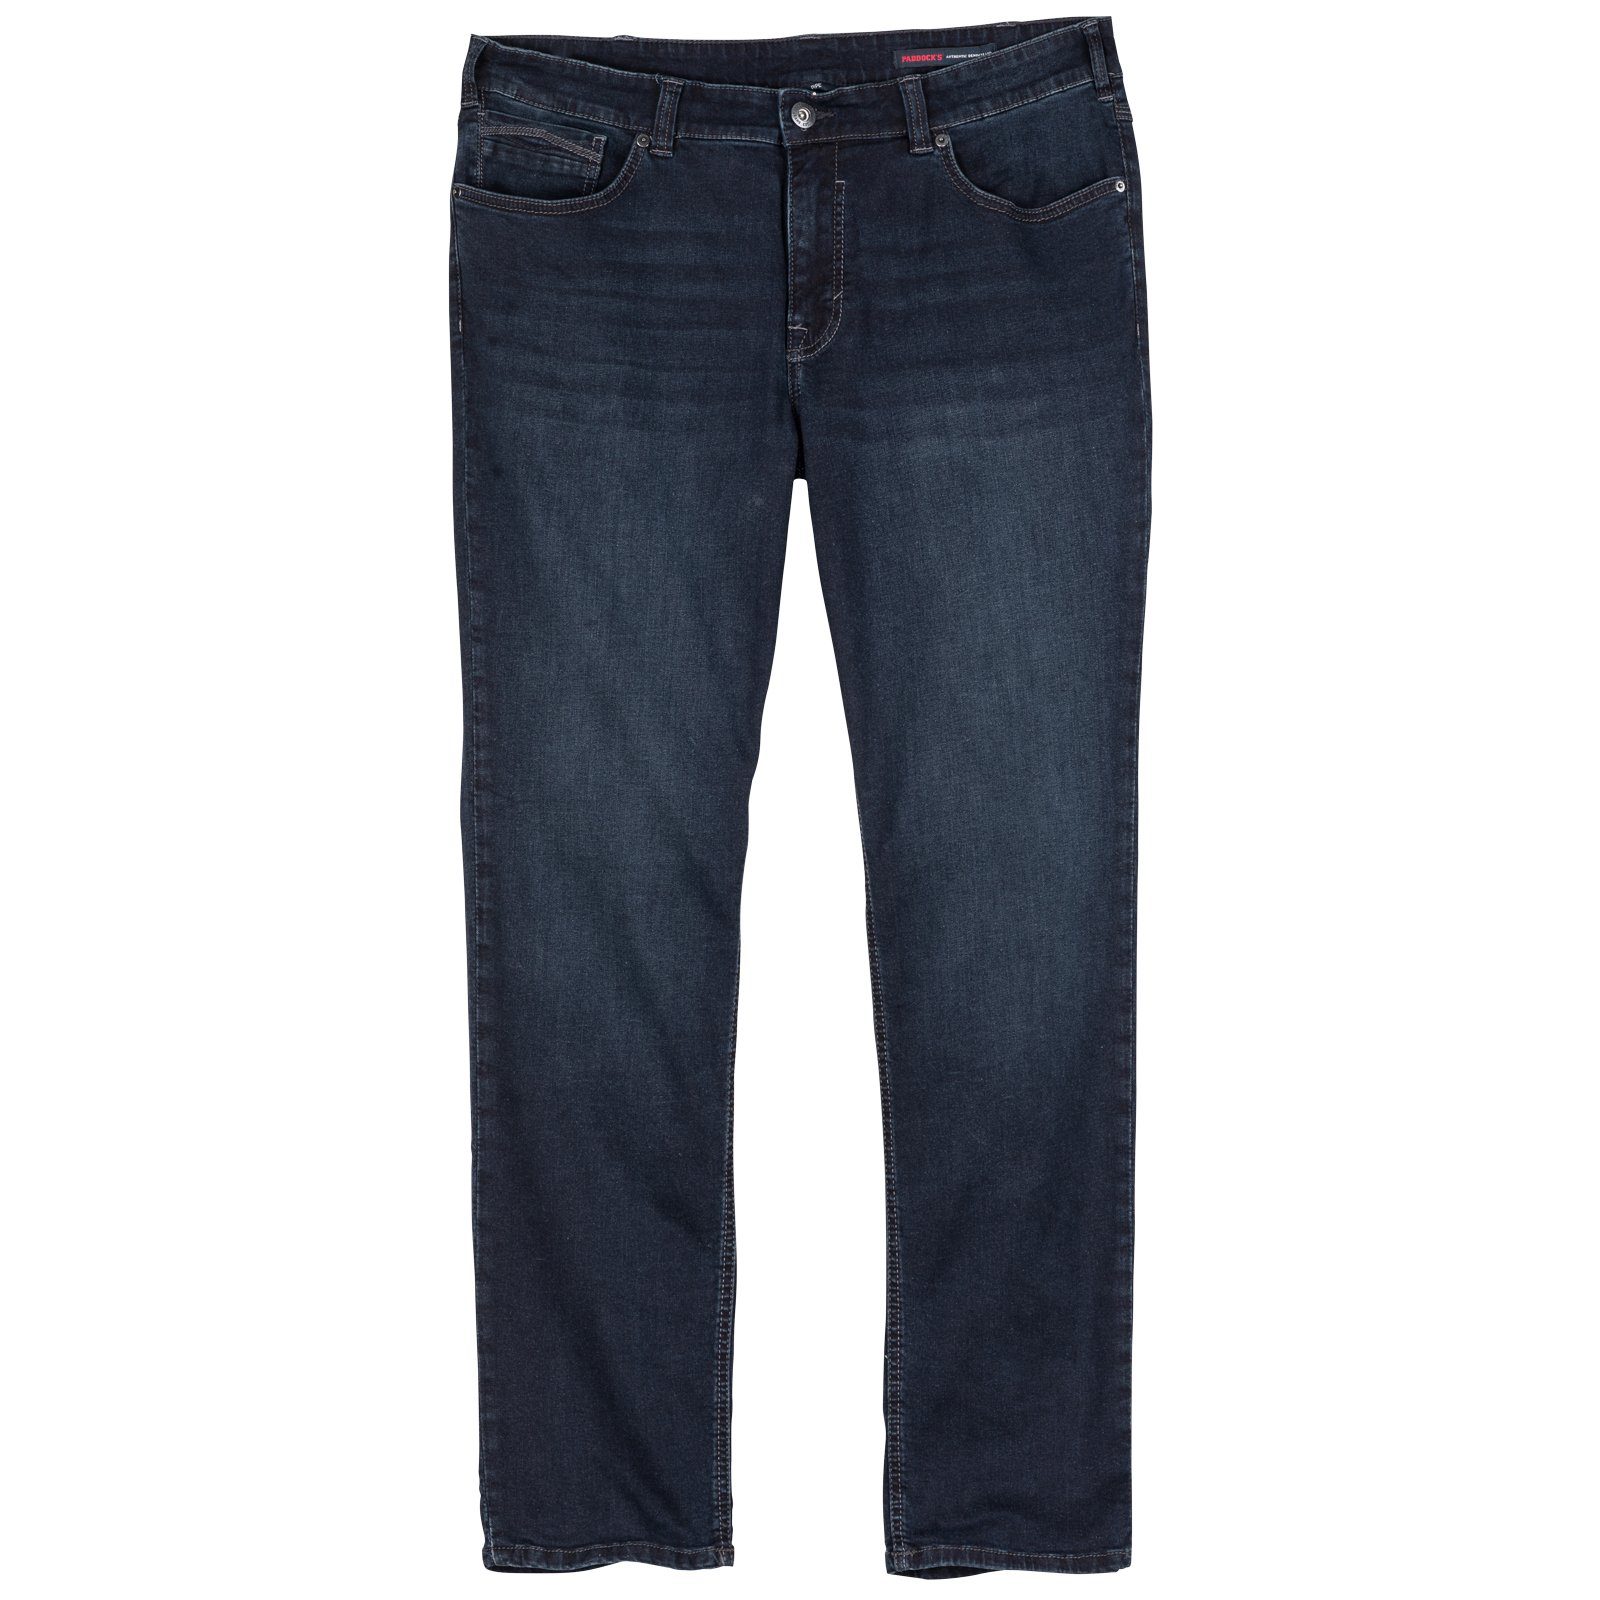 XXL moustache Paddock's Jeans blue Jeans use Pipe black Bequeme Paddock's